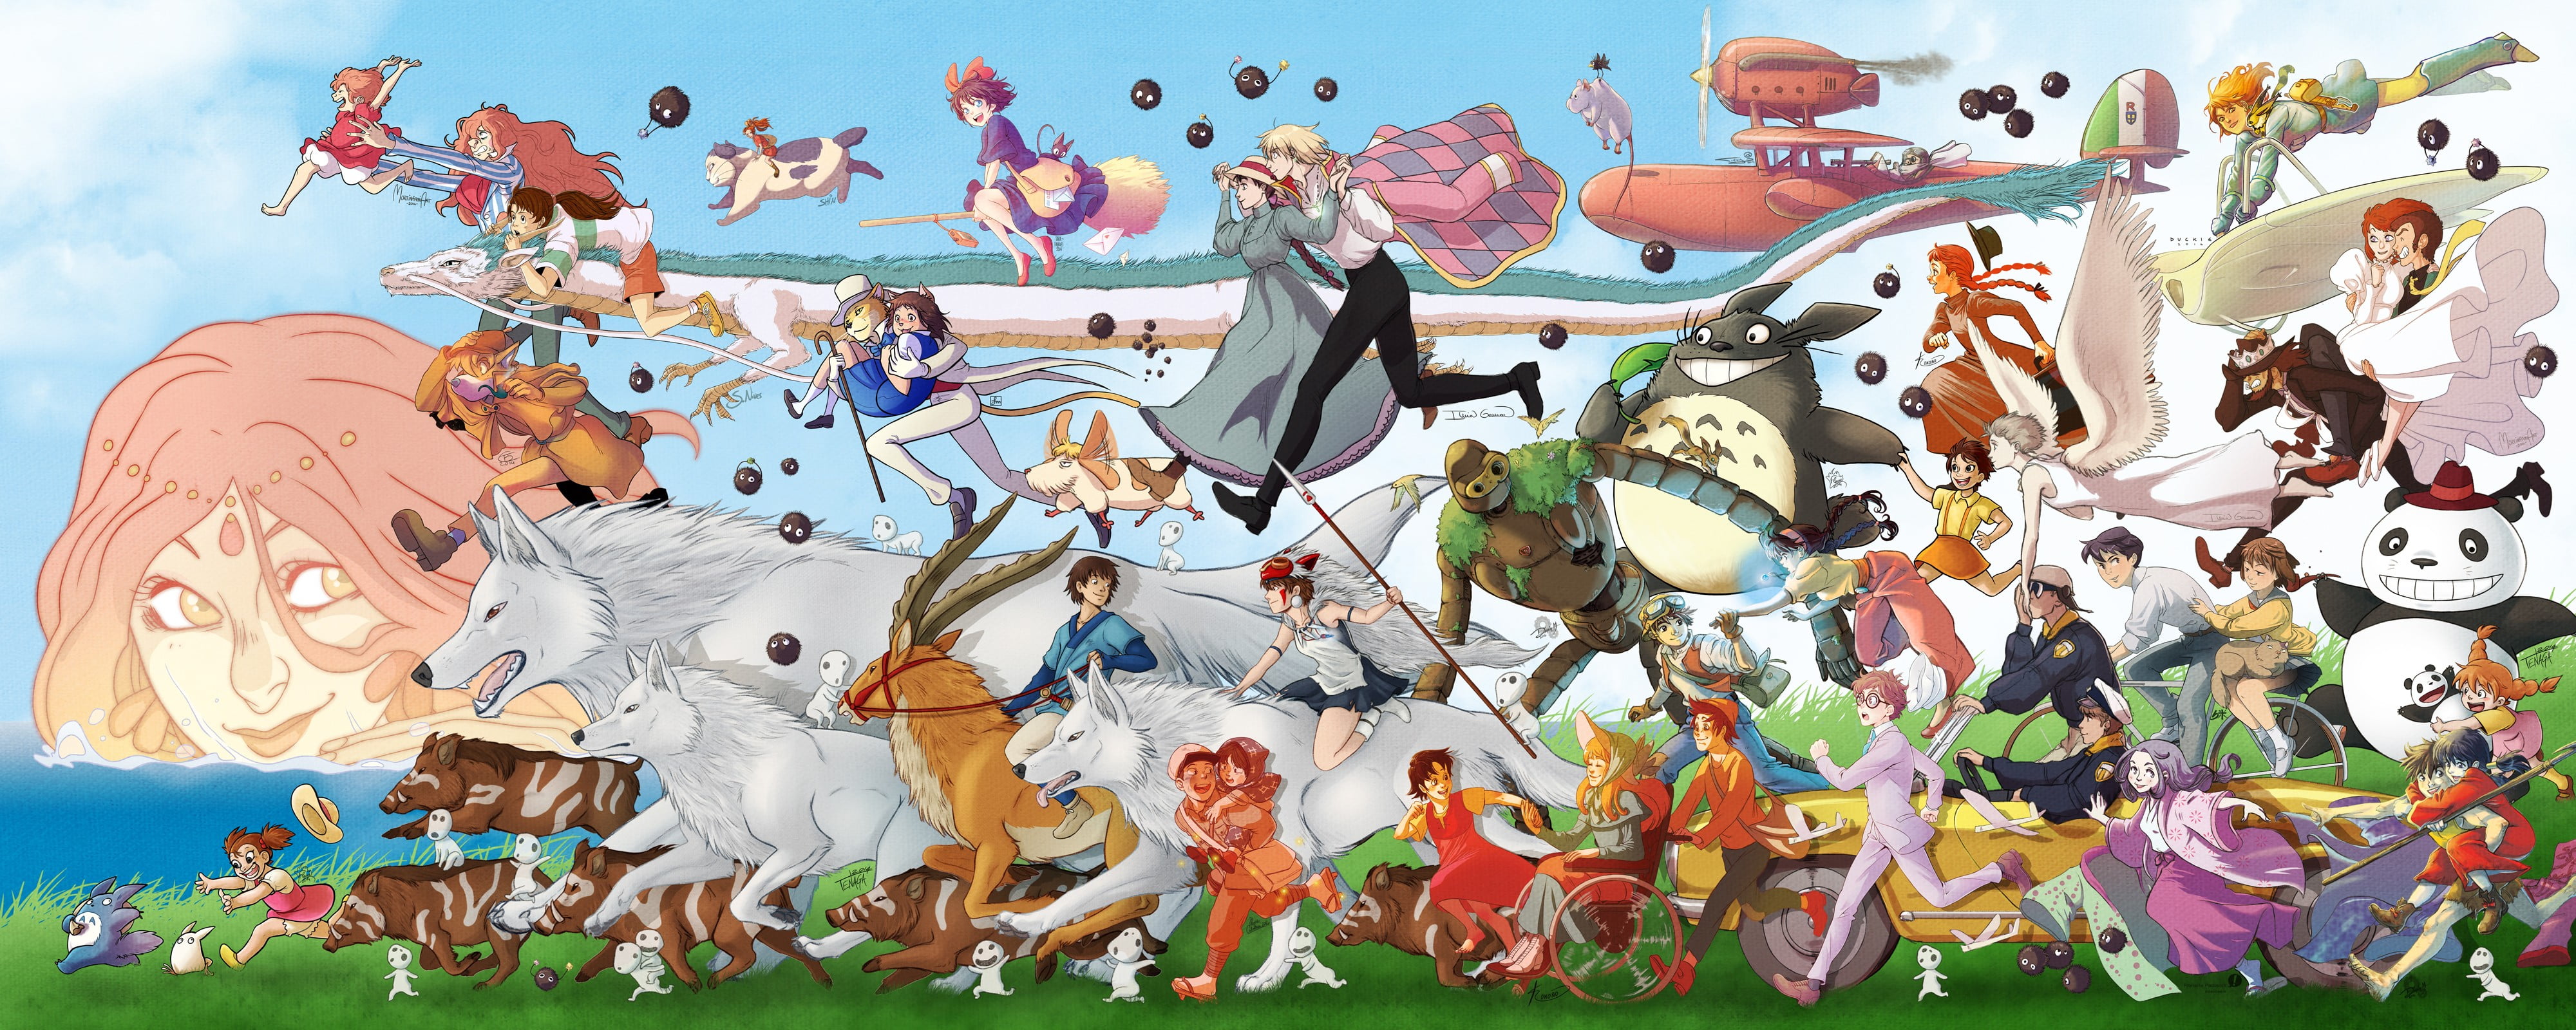 assorted anime characters illustration, anime characters digital wallpaper